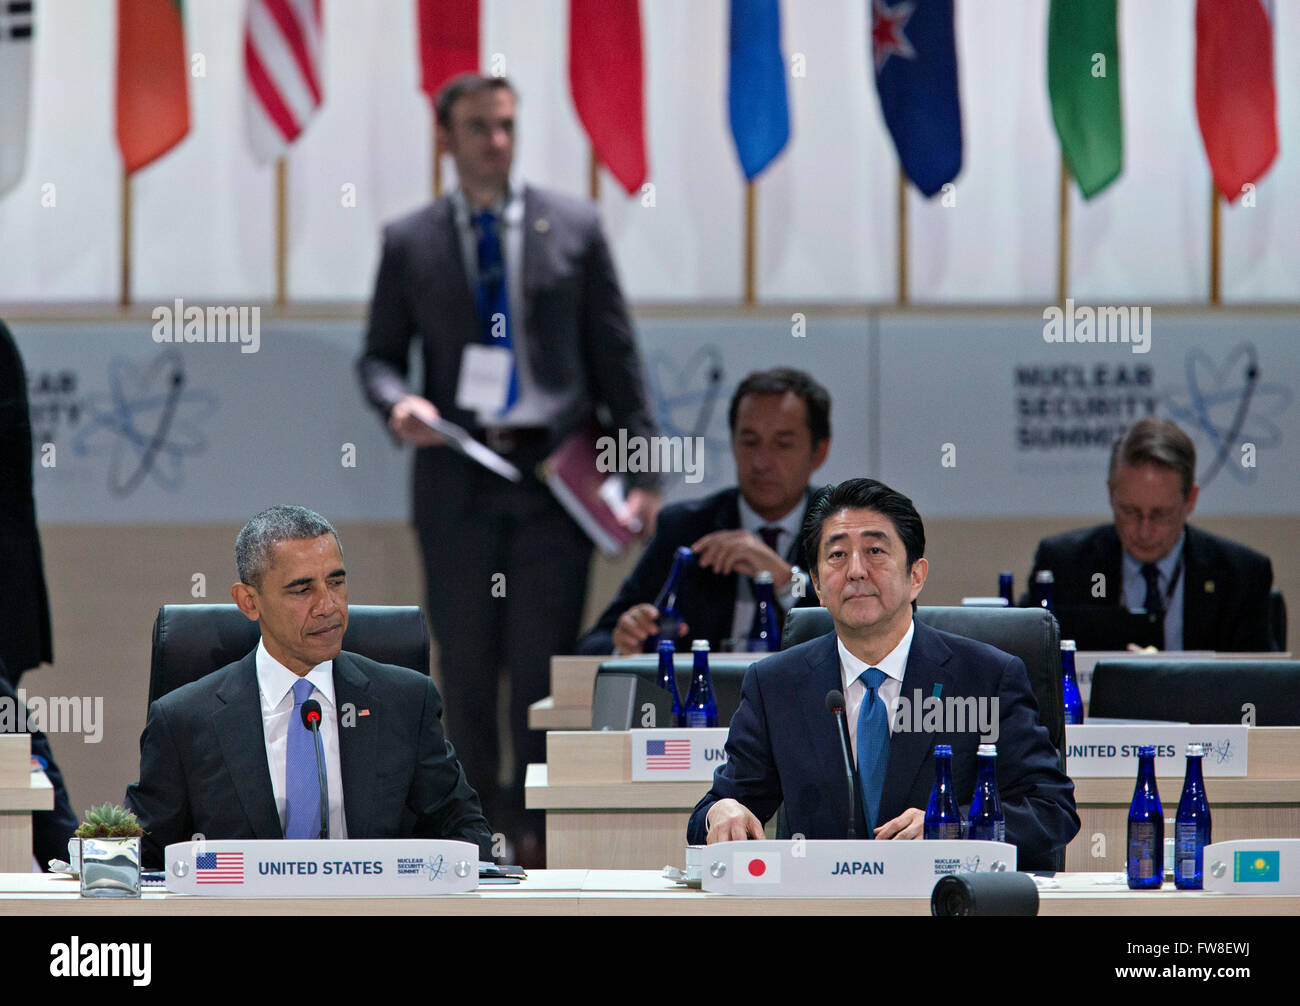 United States President Barack Obama, left, and Shinzo Abe, Japan's prime minister, wait to begin an opening plenary entitled 'National Actions to Enhance Nuclear Security' at the Nuclear Security Summit in Washington, DC, U.S., on Friday, April 1, 2016. After a spate of terrorist attacks from Europe to Africa, Obama is rallying international support during the summit for an effort to keep Islamic State and similar groups from obtaining nuclear material and other weapons of mass destruction. Credit: Andrew Harrer/Pool via CNP - NO WIRE SERVICE - Stock Photo